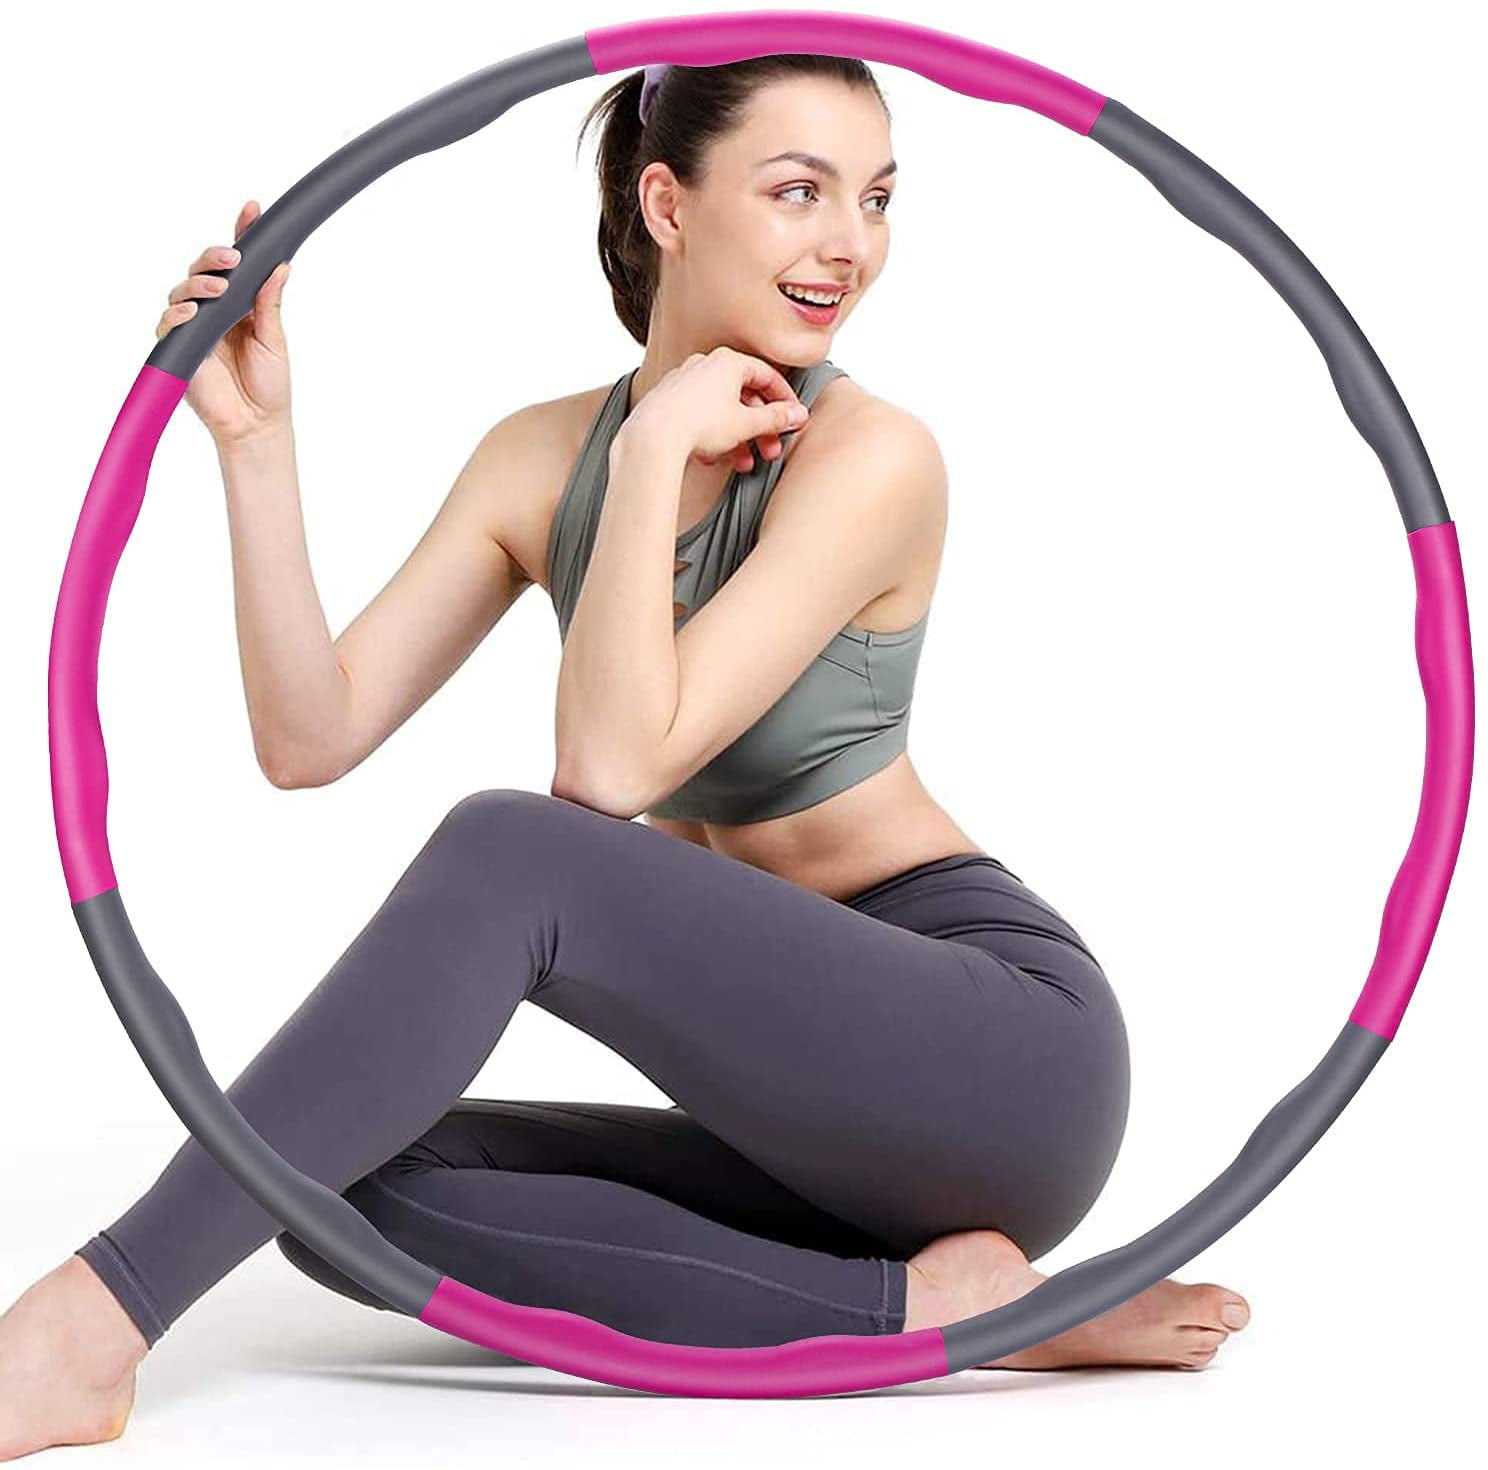 VANBAR Hoola Hoop for Exercise 8-Section Detachable Professional Wavy Design Fitness Hoola Hoop for Child Adults Weighted Hula Hoops for Adults